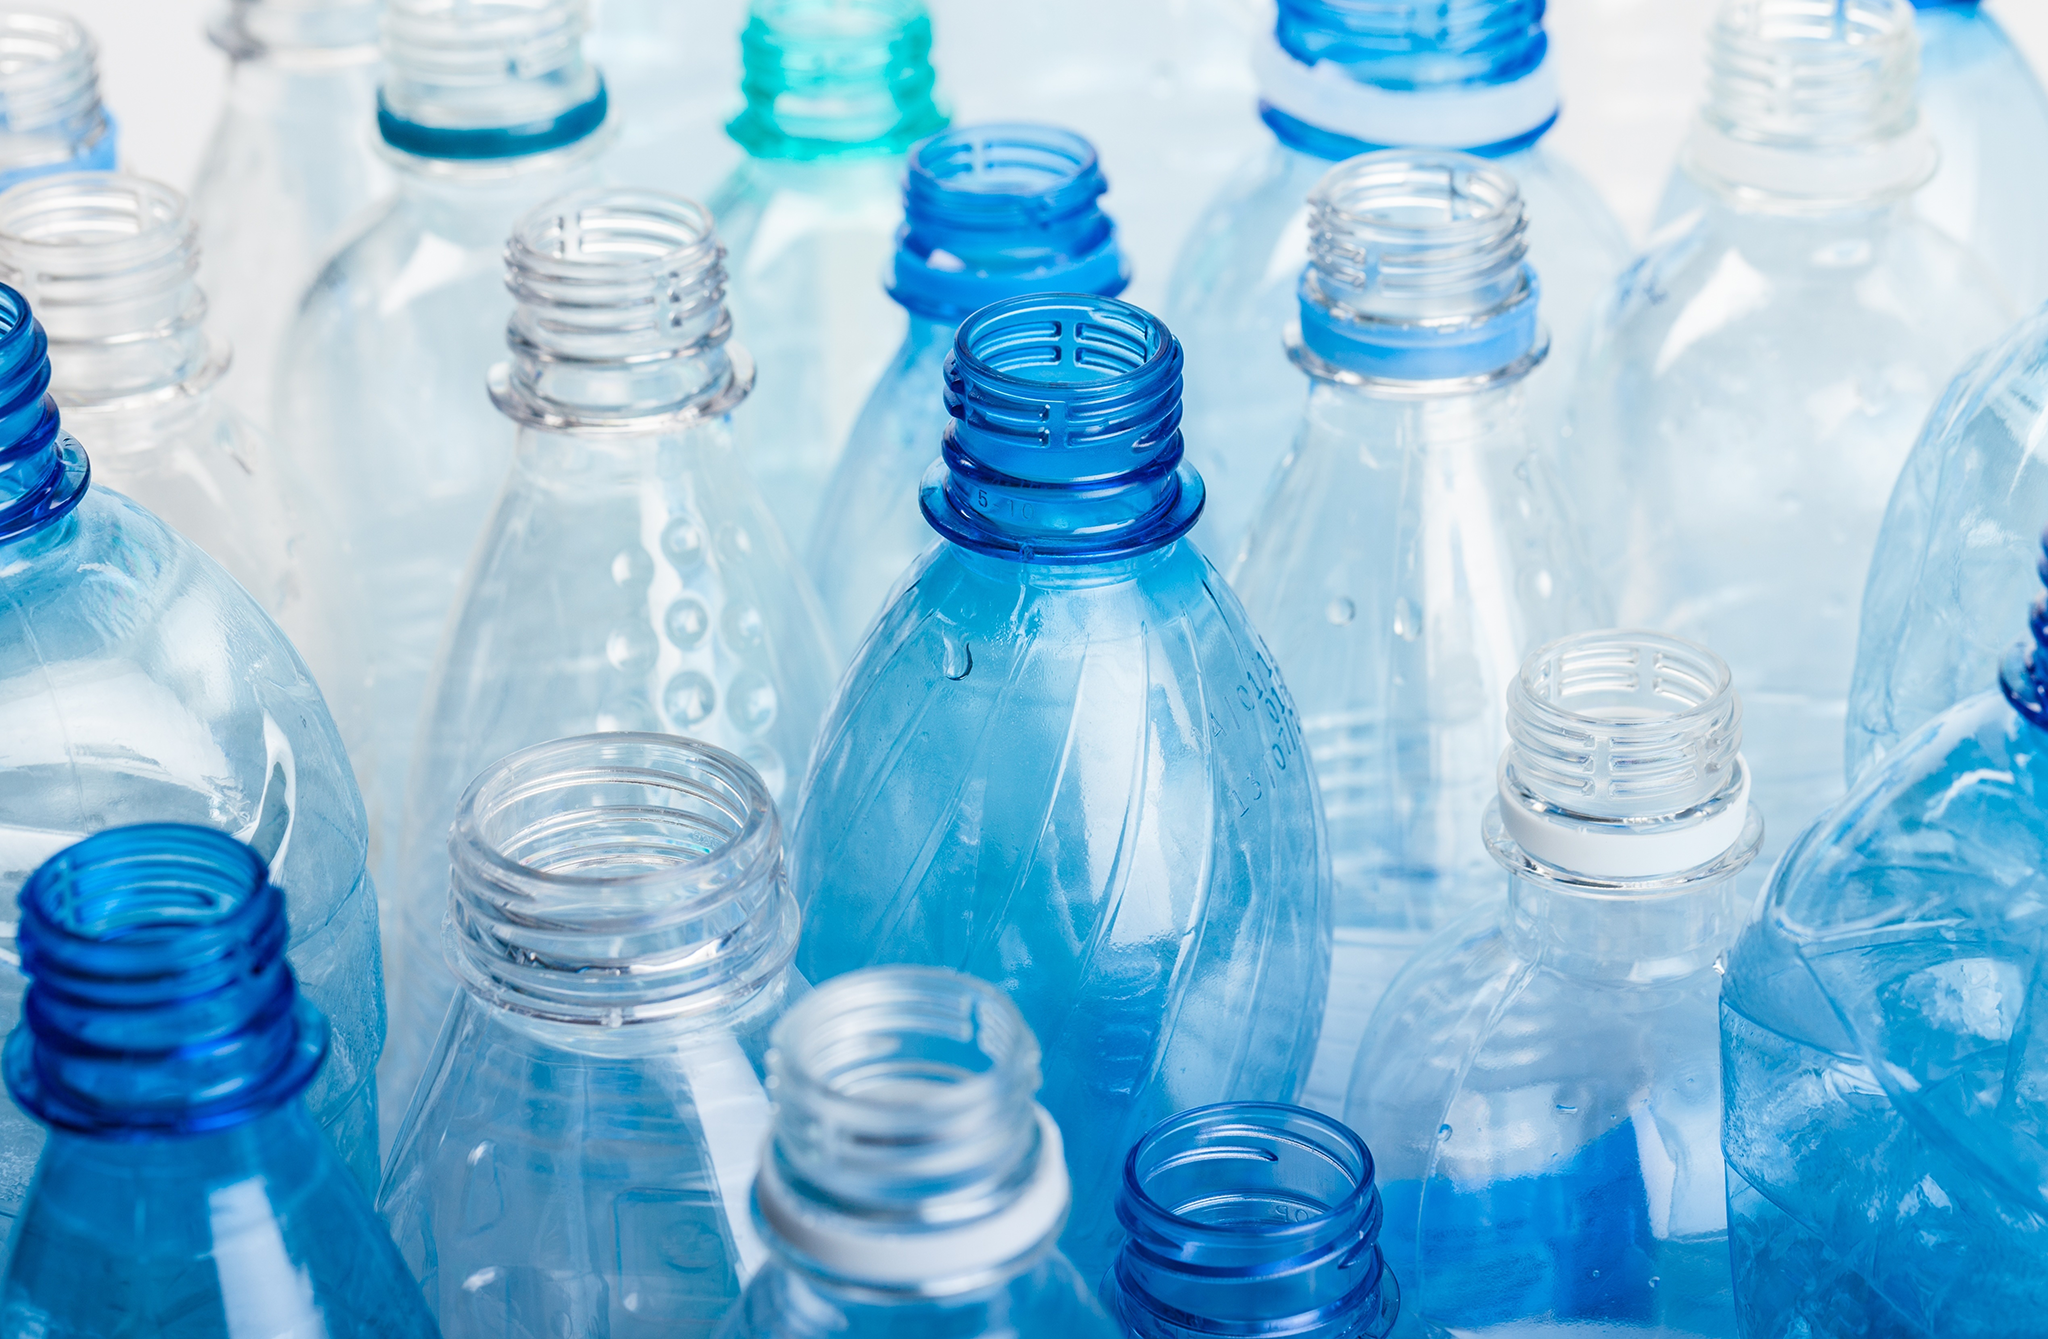 Blue and clear plastic bottles